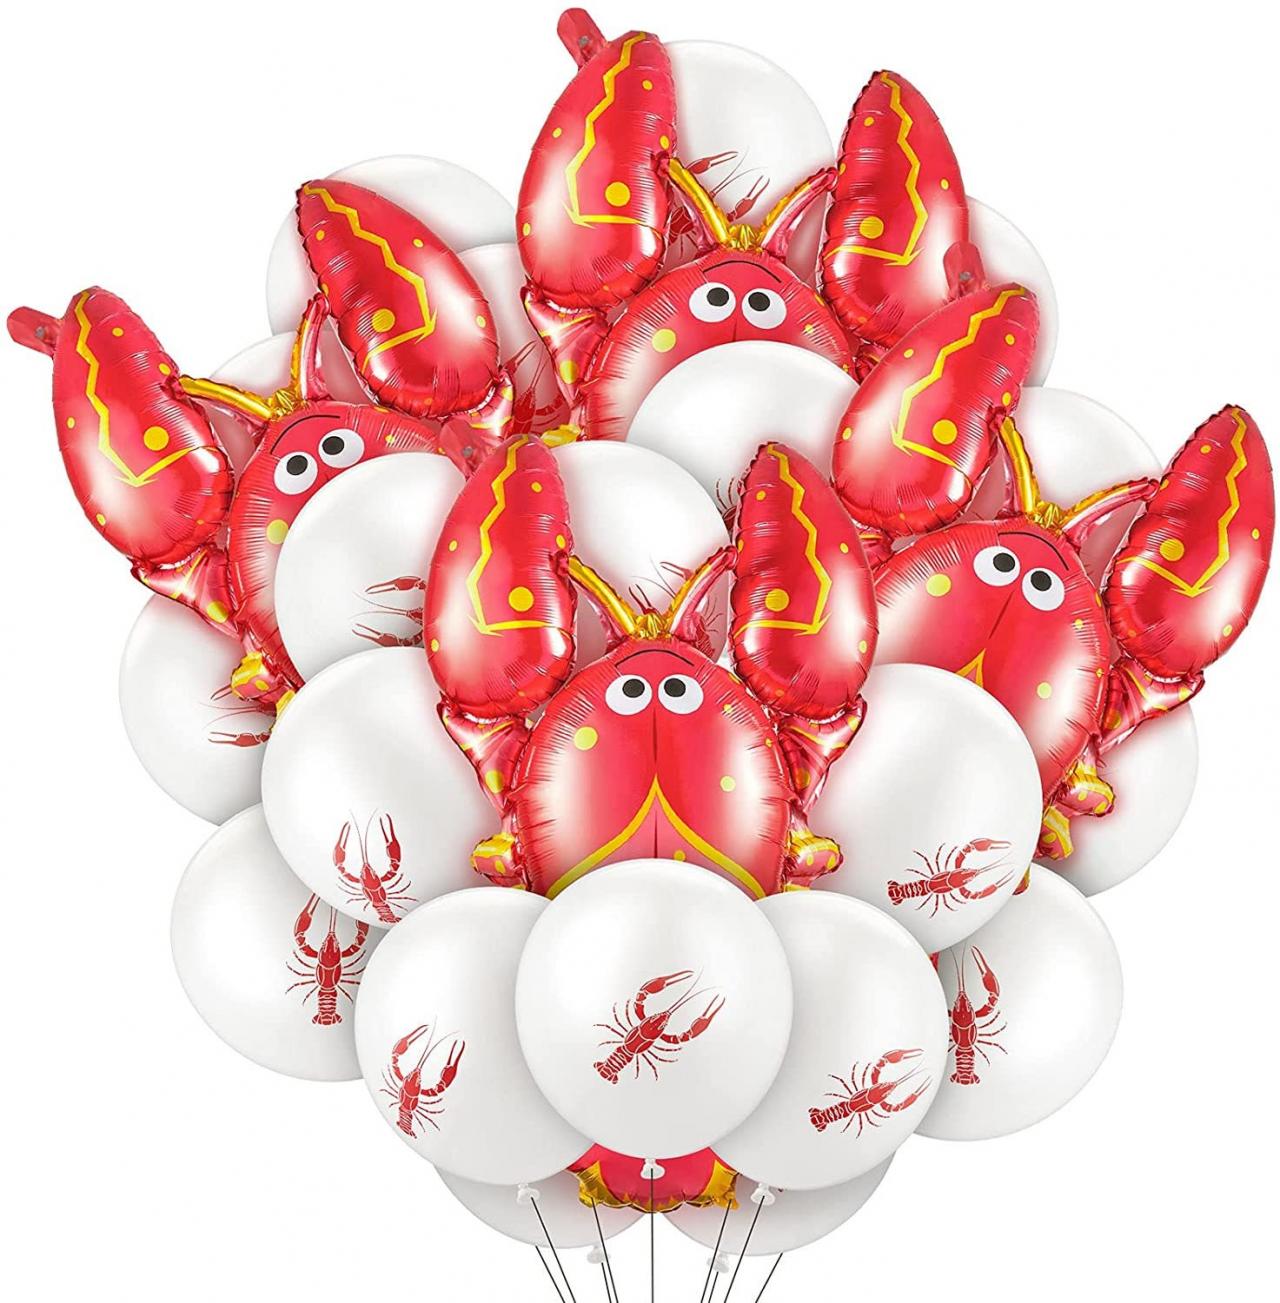 Crawfish Red Jumbo Foil 3.5 Ft By 2.5 Ft Balloons Lobster Seafood Boil Party Orleans Cajun Birthday